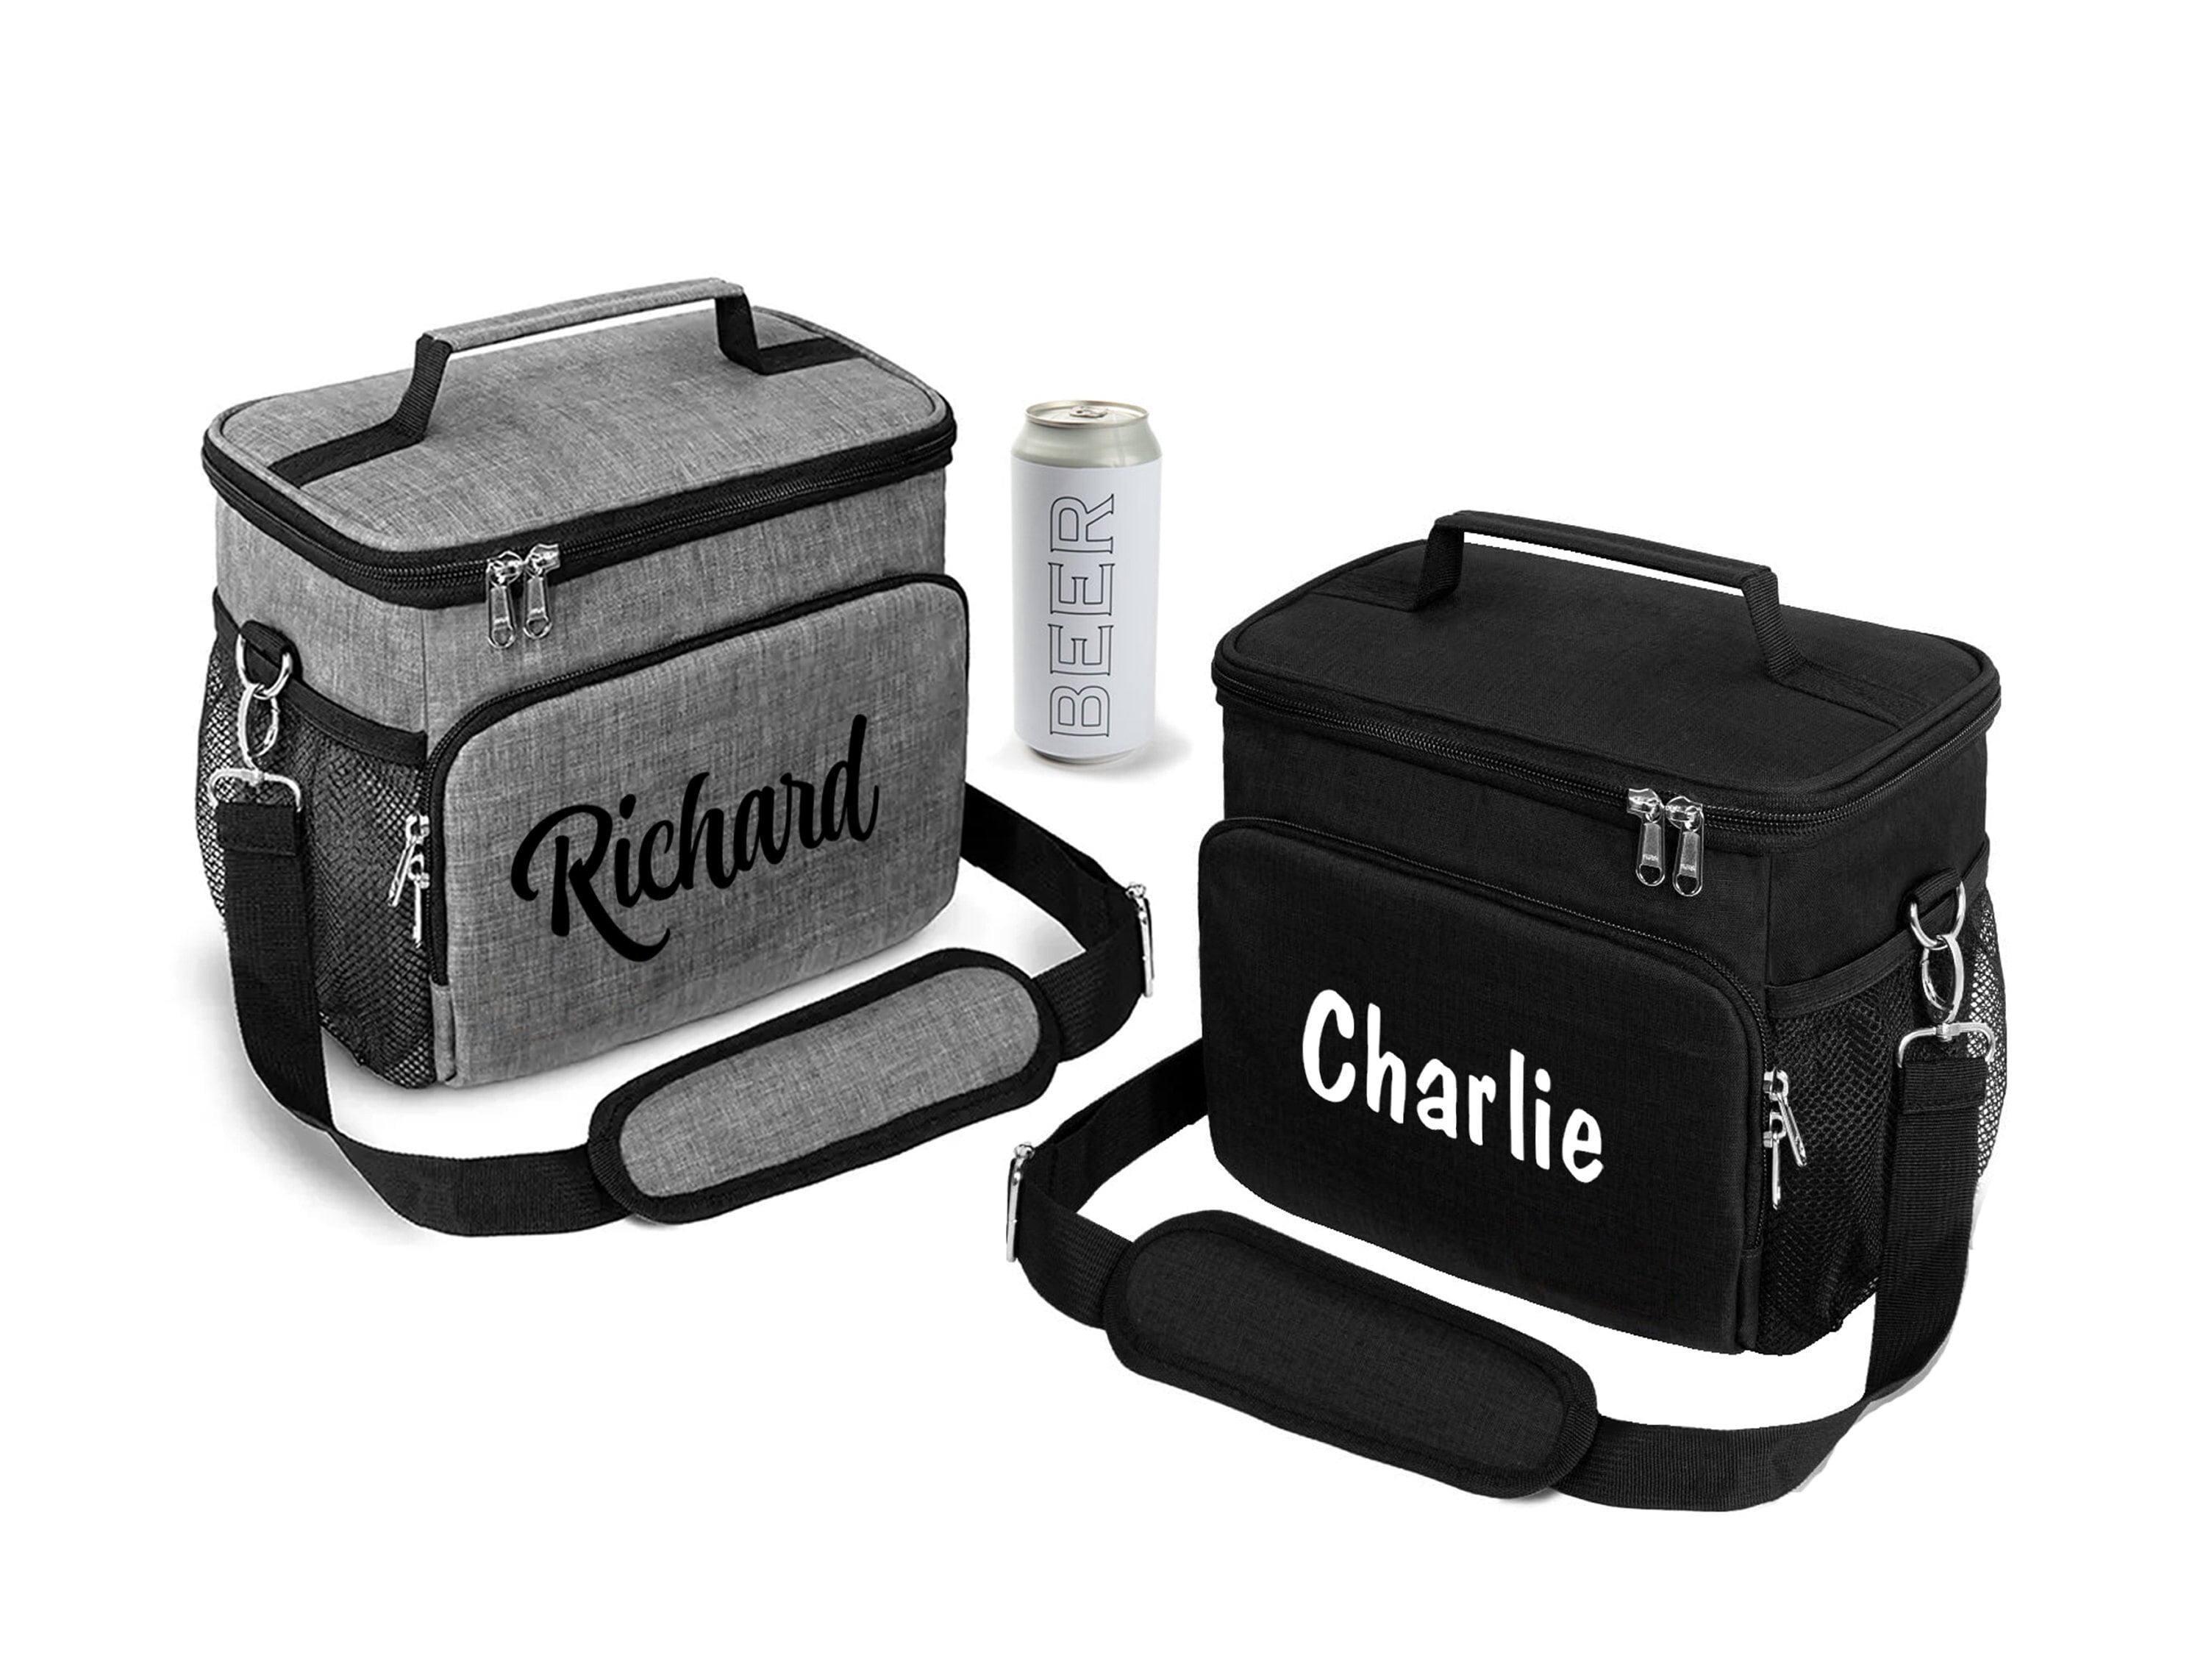 Charlie Lunch Bag For Kids - Durable & Insulated